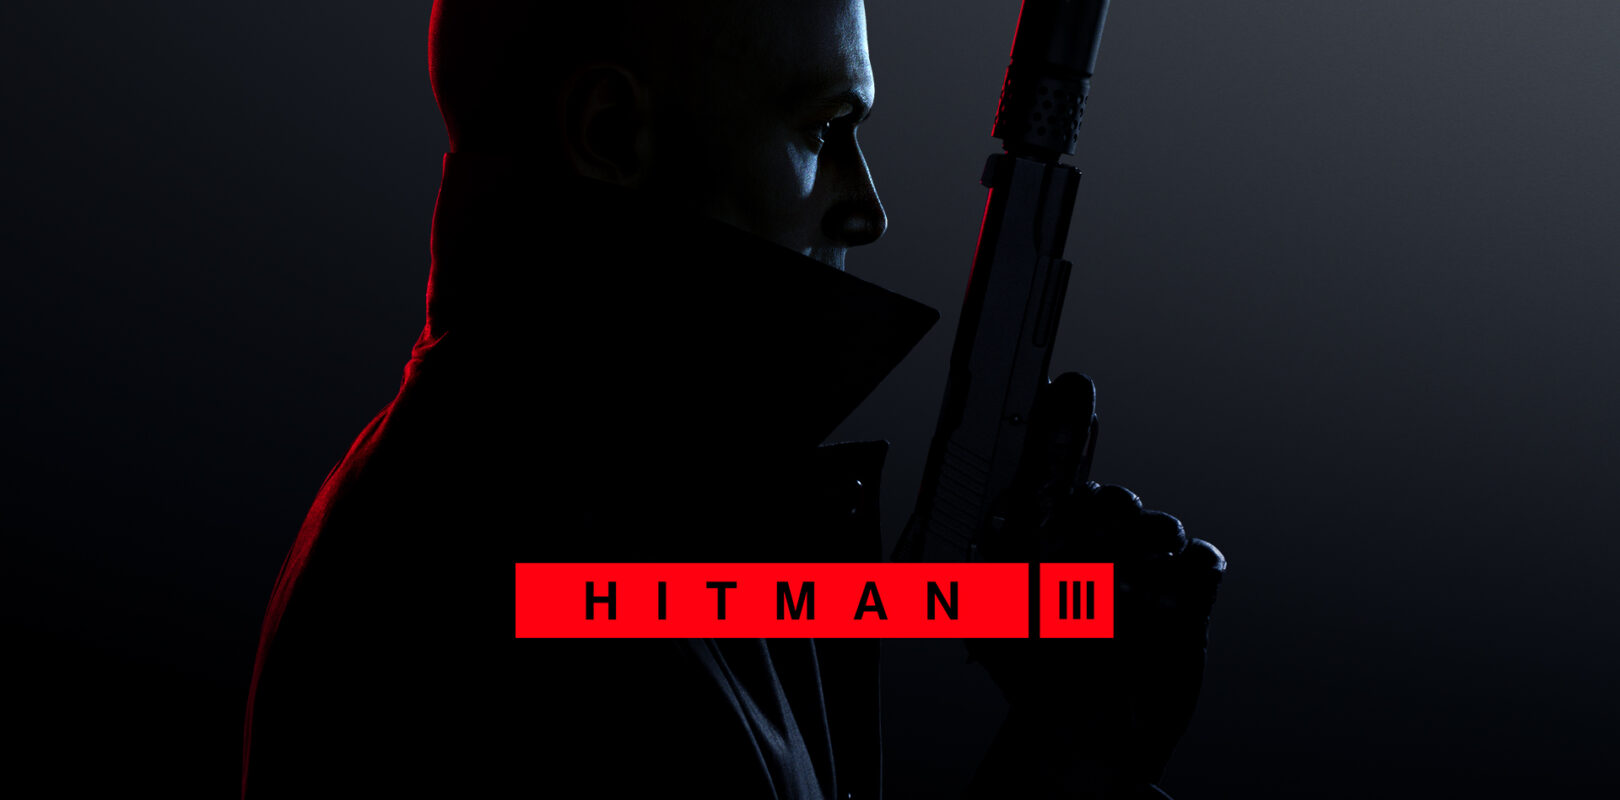 Hitman 3 PC review: Perhaps the VR version will be better